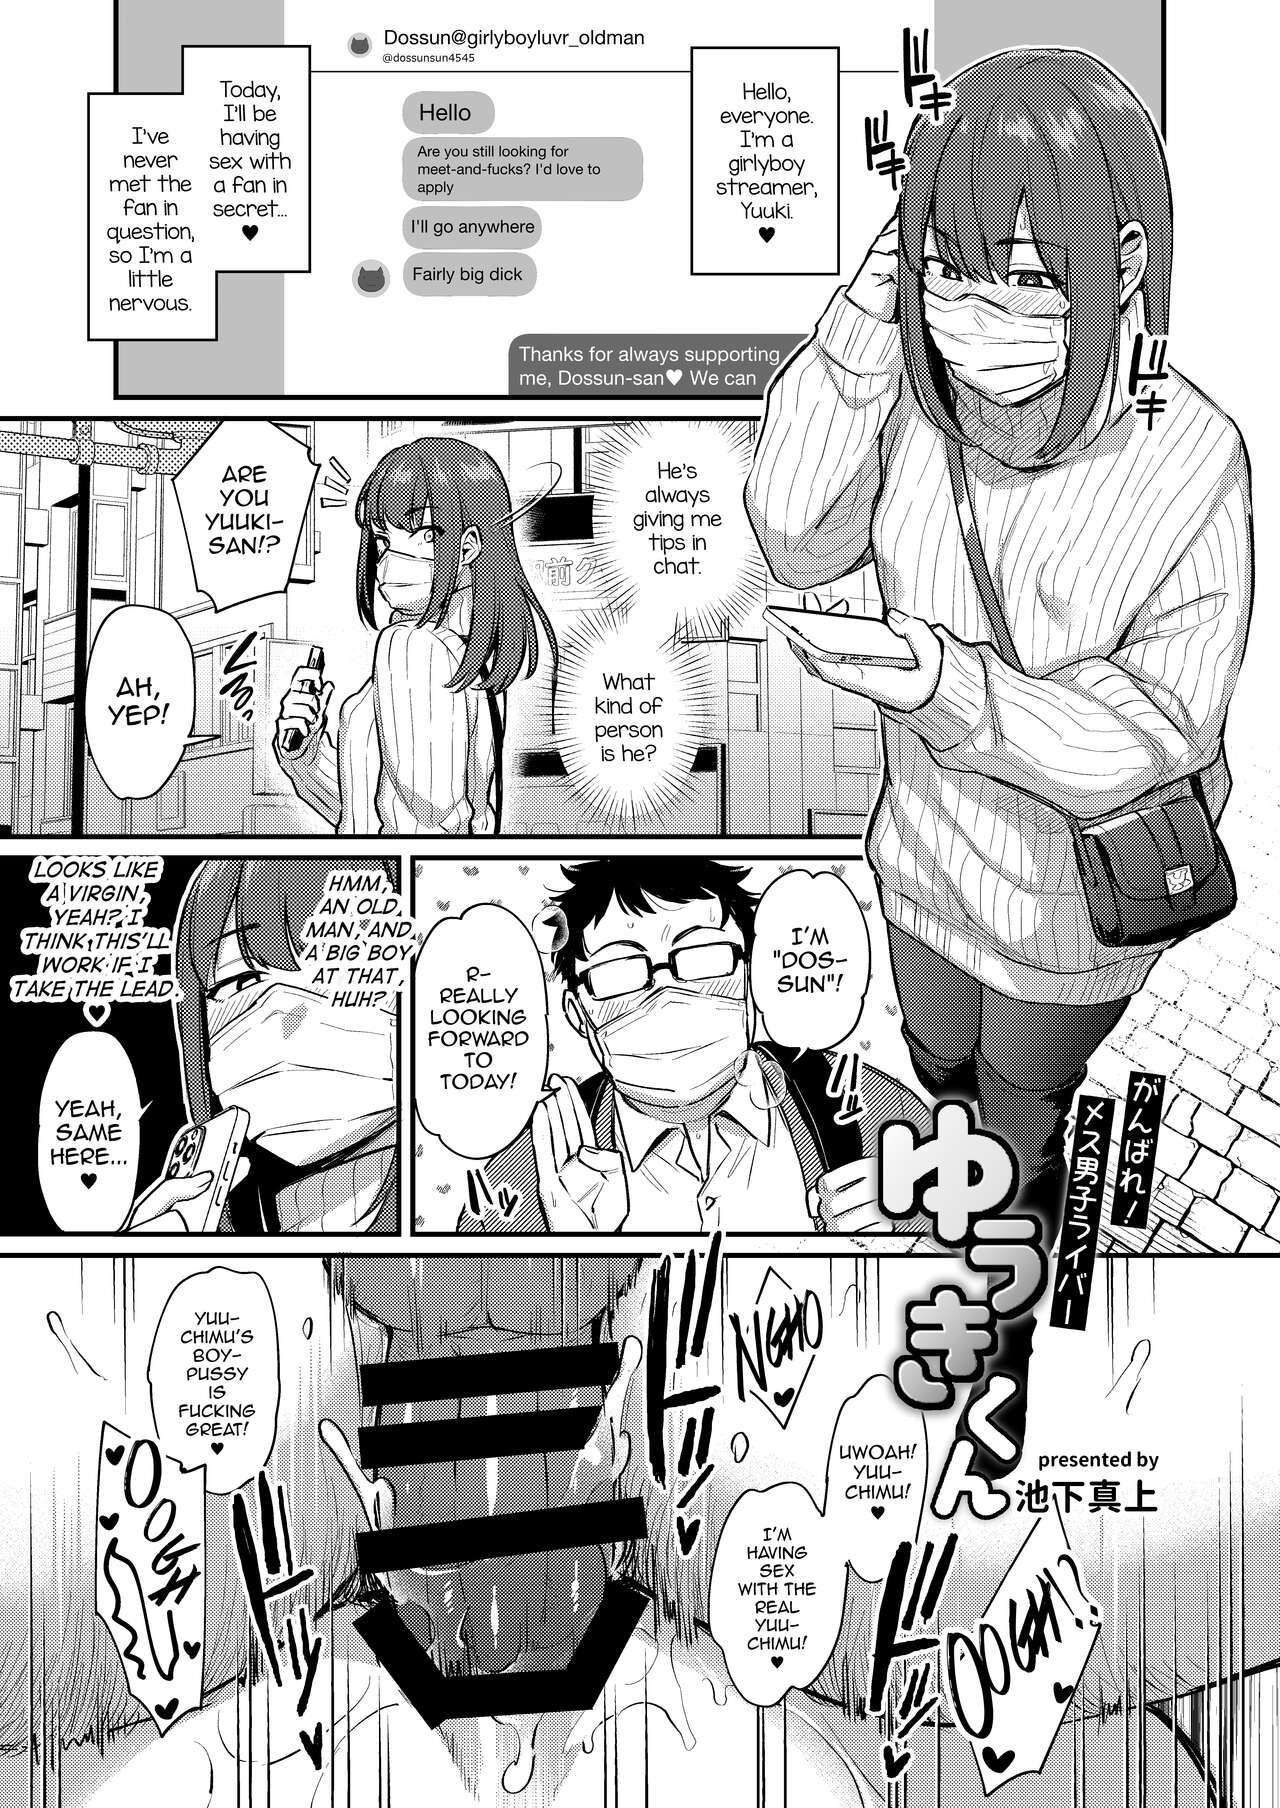 Chubby Pages 41-52 of Shemale & Mesu Danshi Goudoushi SHEMALE C's HAVEN 2 Gay - Page 1